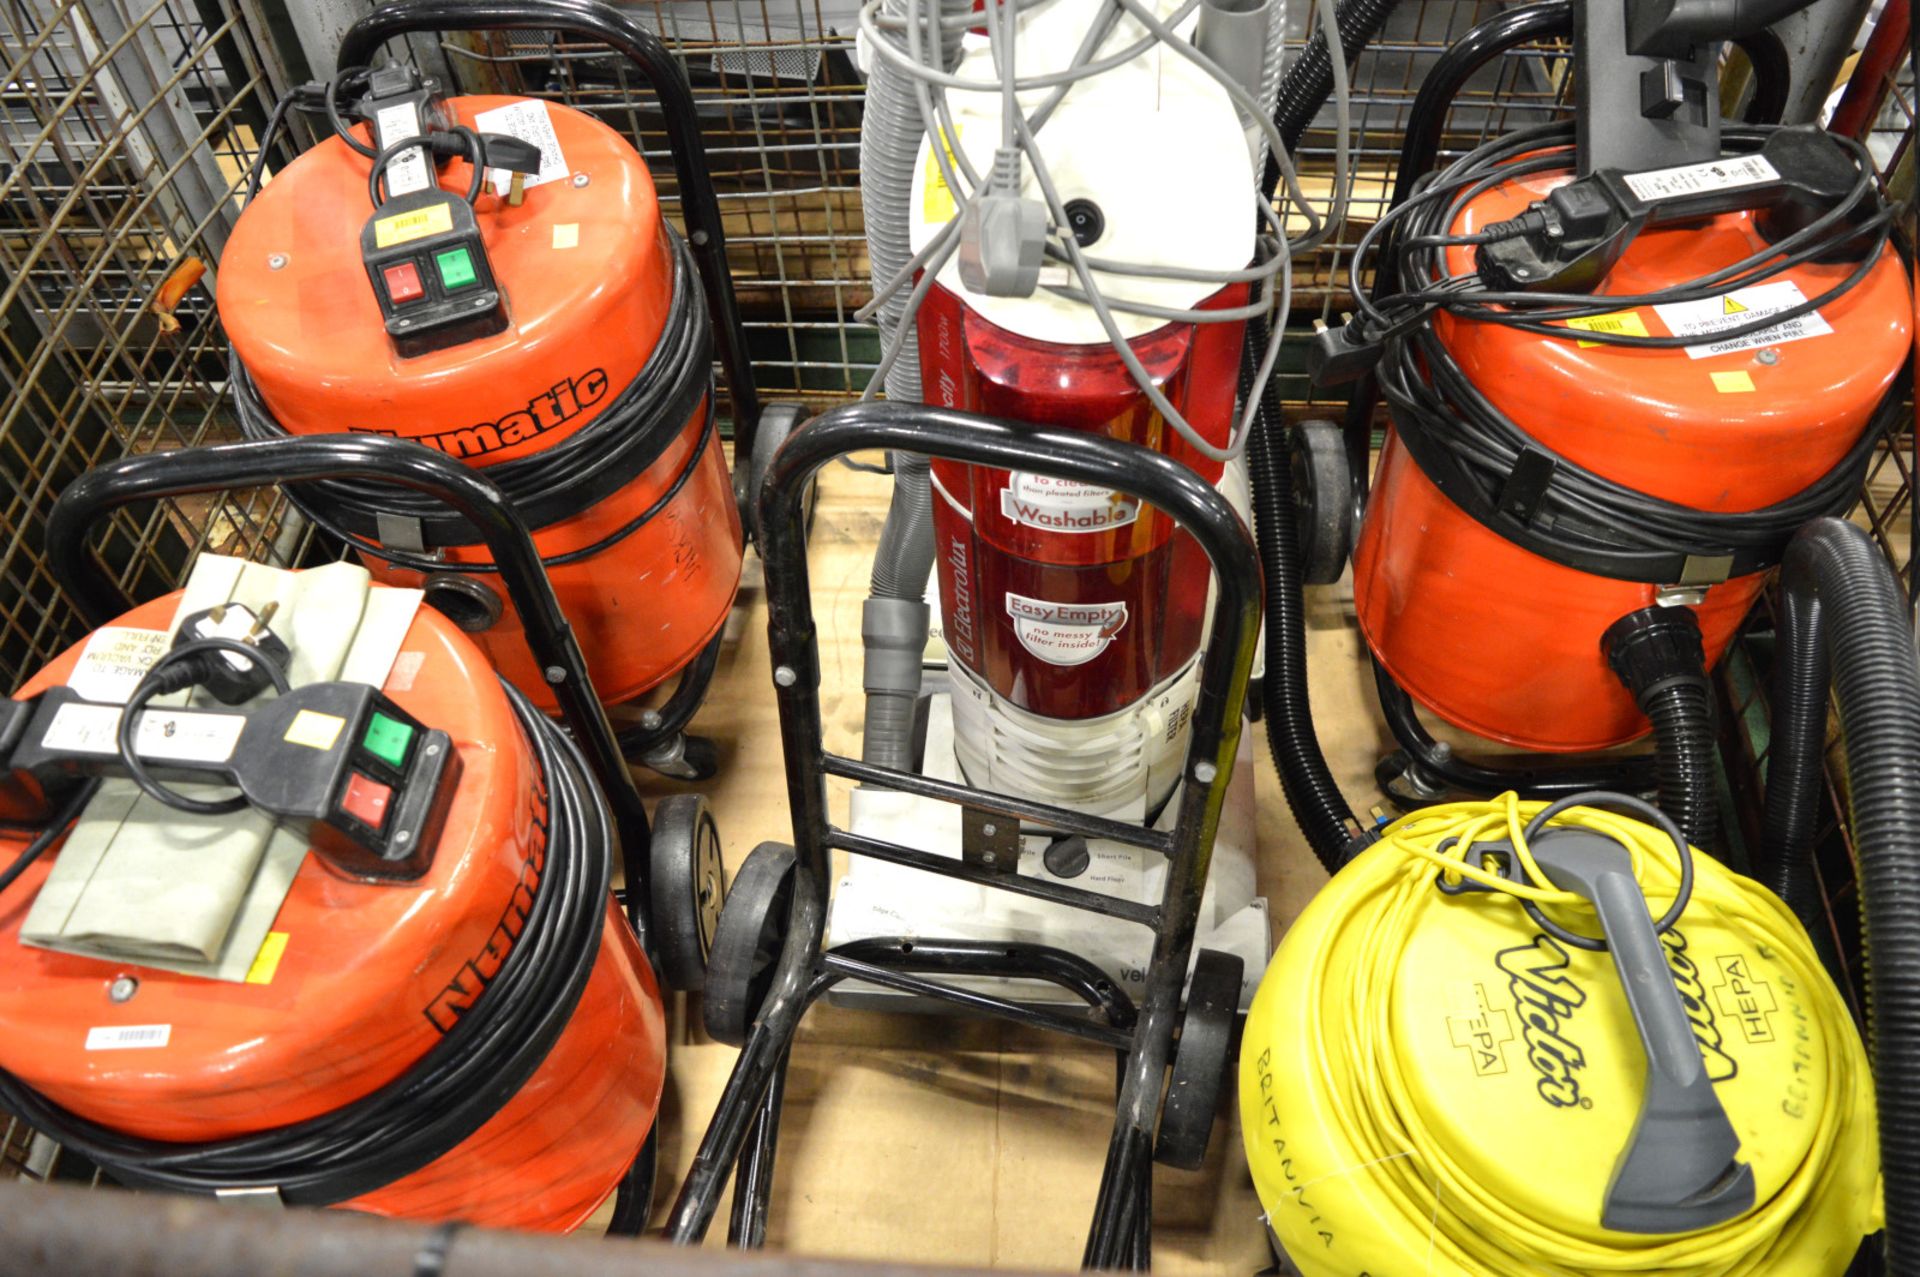 3x Numatic Industrial Vacuum Cleaners, Victor Vacuum Cleaner, 2x Electrolux Upright Carpet - Image 2 of 2